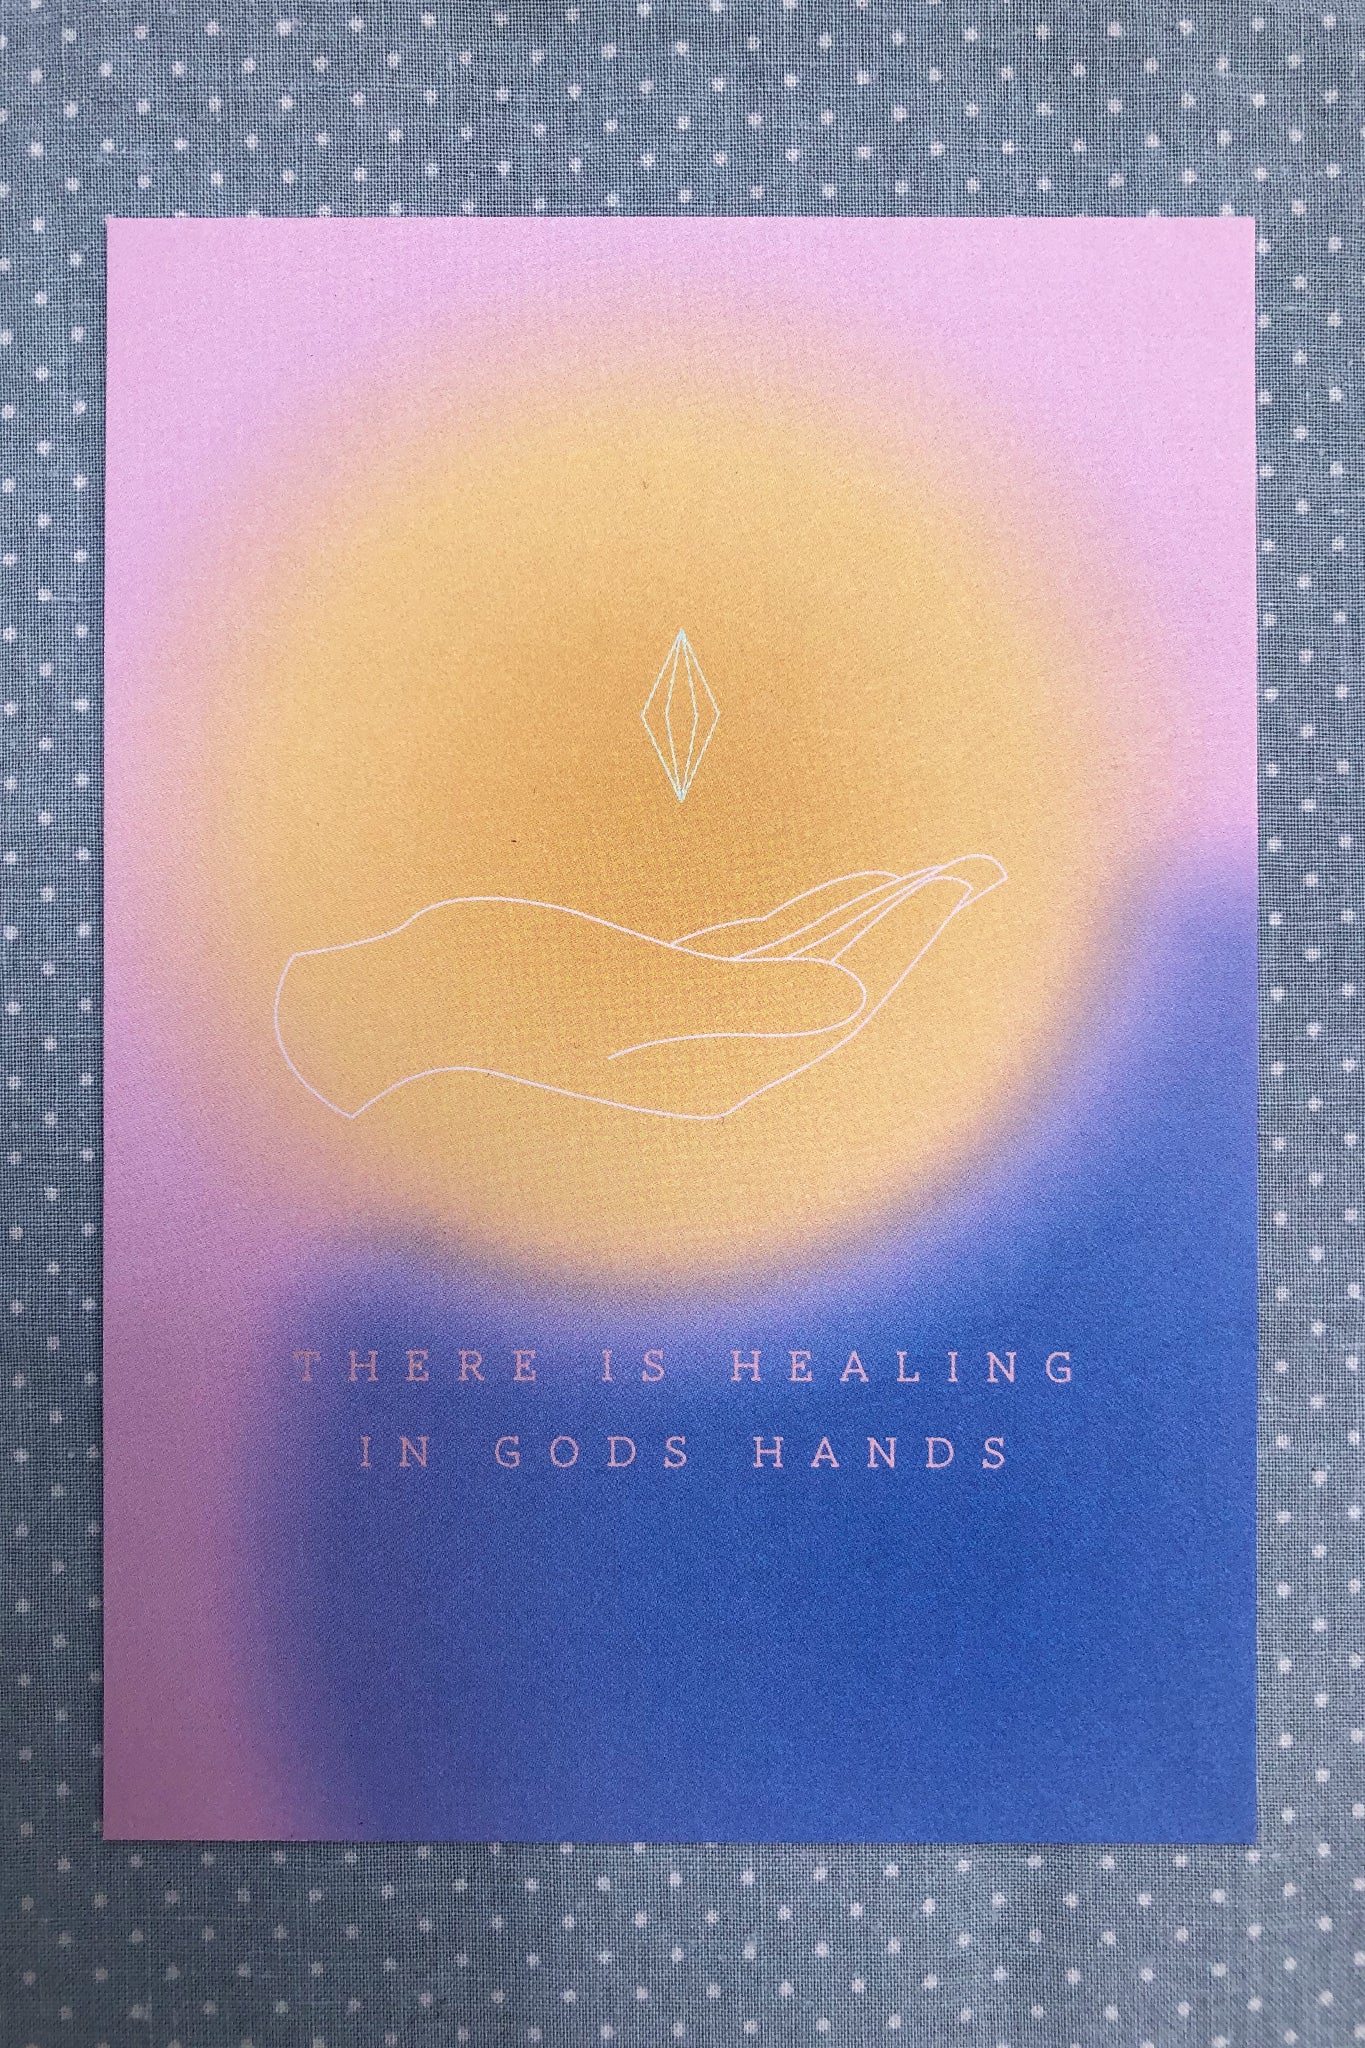 Postkarte - There is healing